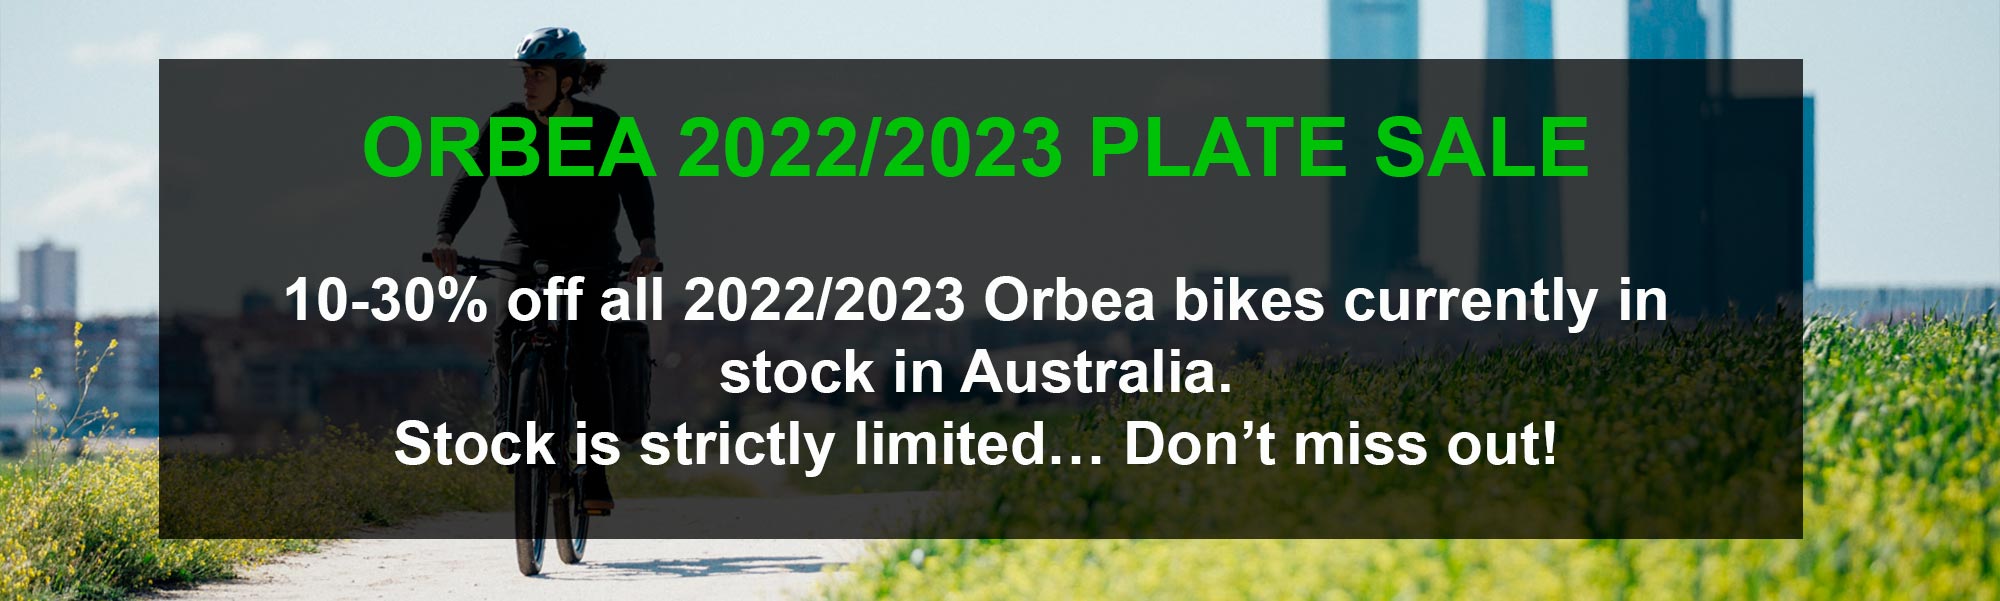 Orbea 2022/2023 plate sale on now. 10-30% off